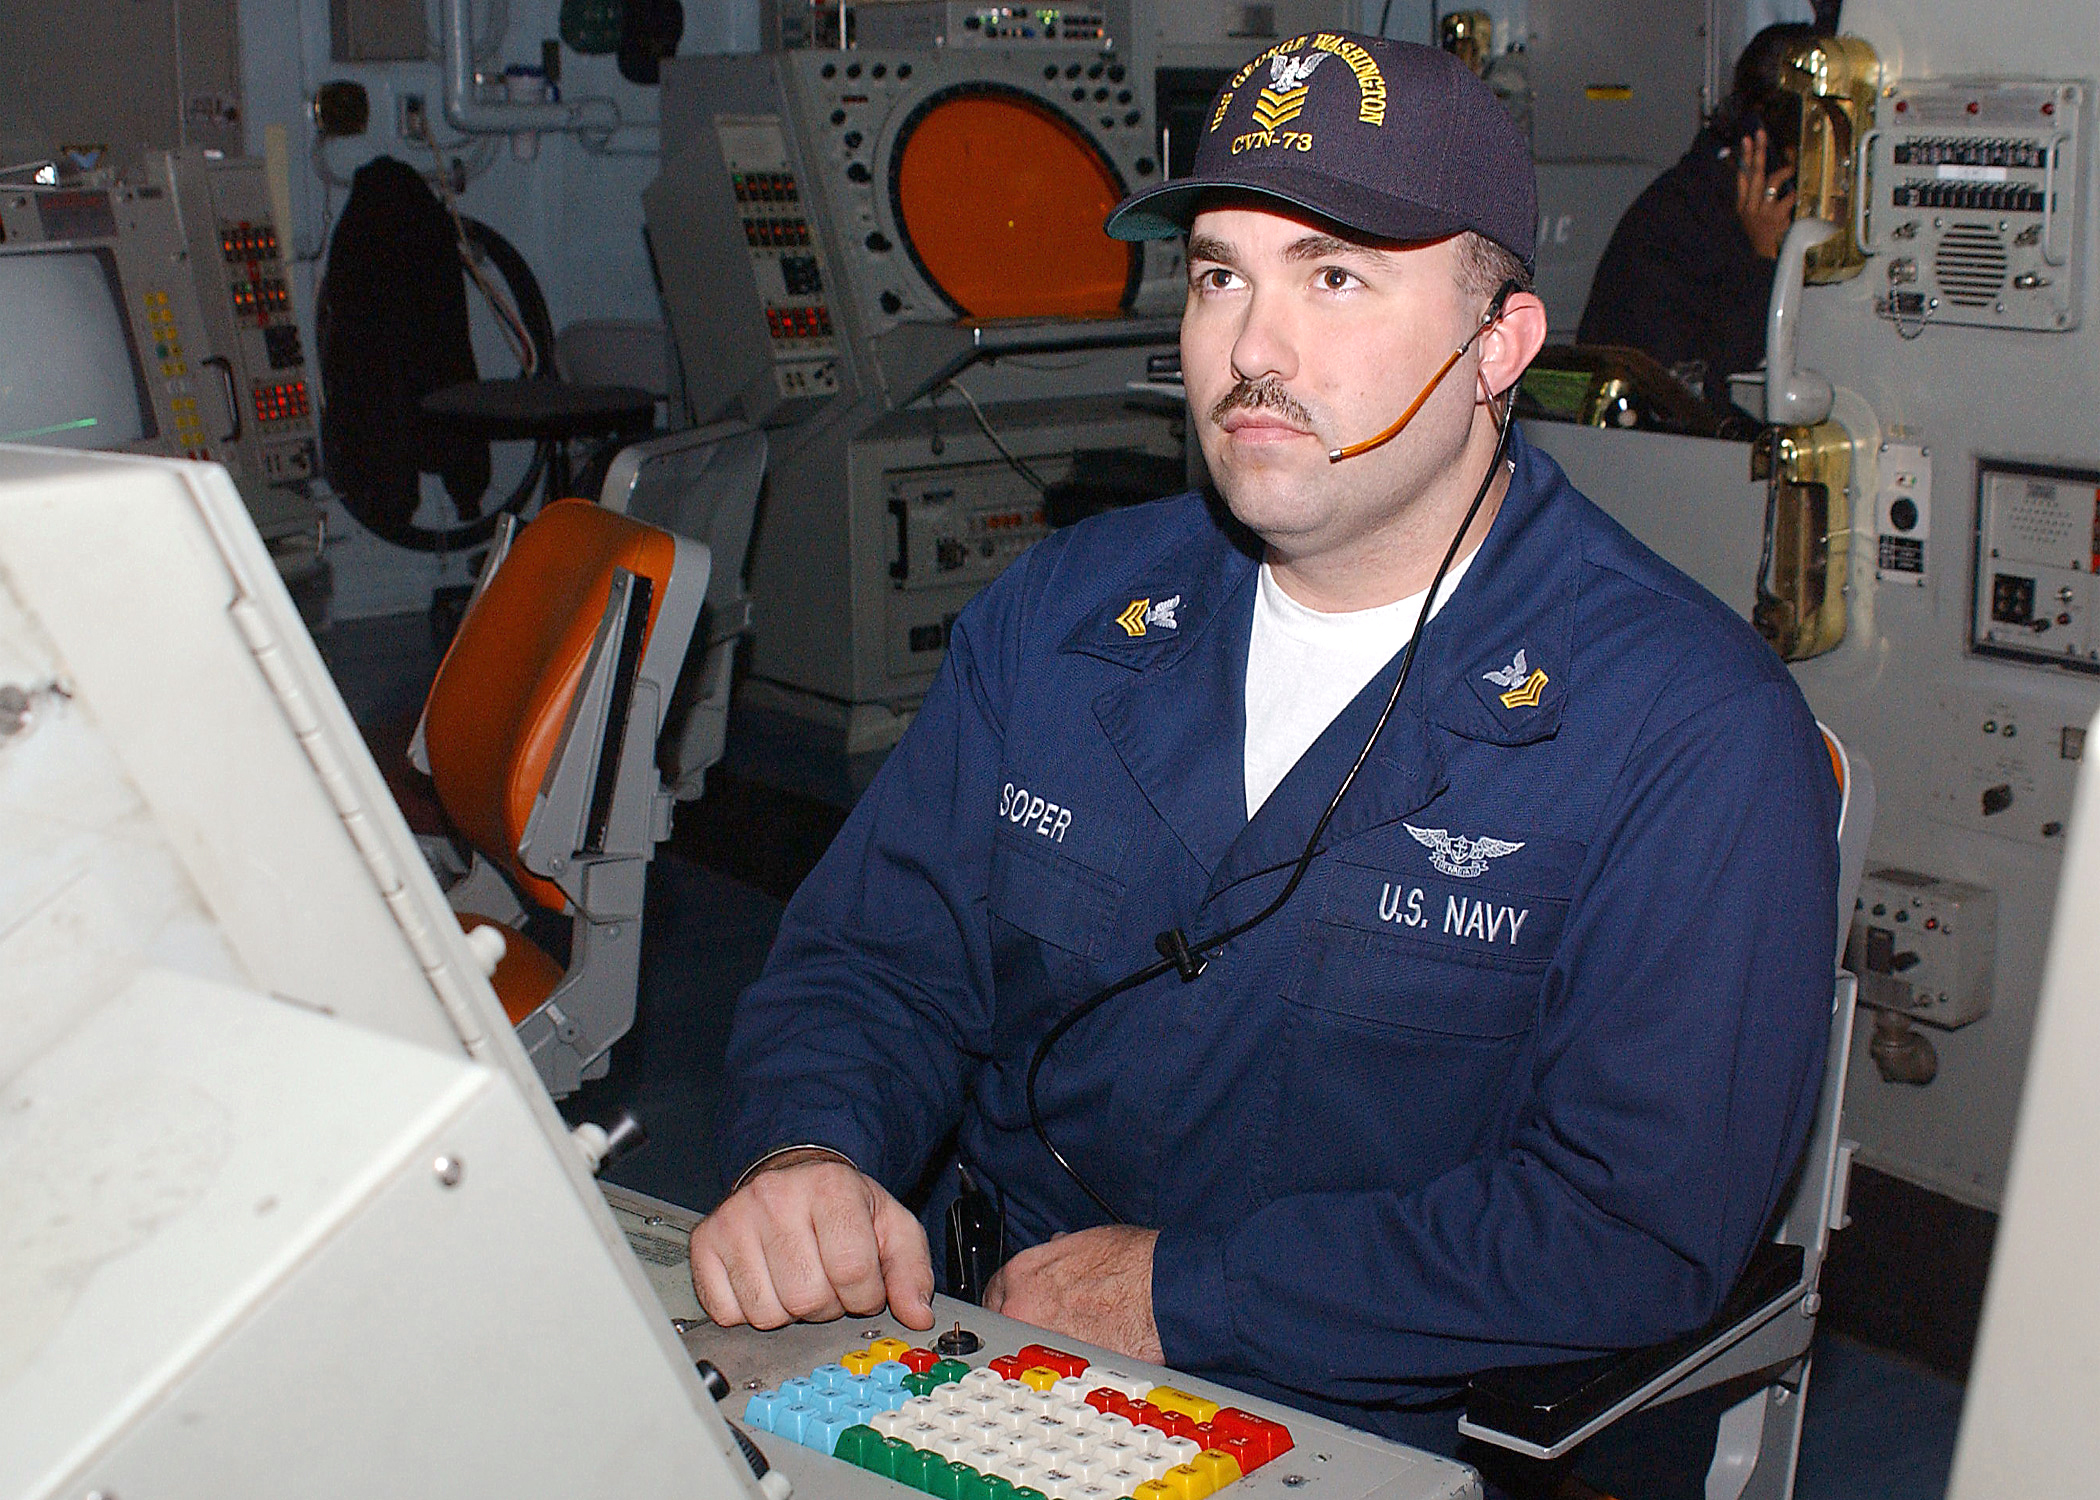 US Navy 030127-N-6653S-001 Air Traffic Controller 1st Class Brian Soper keeps track of incoming and outgoing aircraft on his radar console